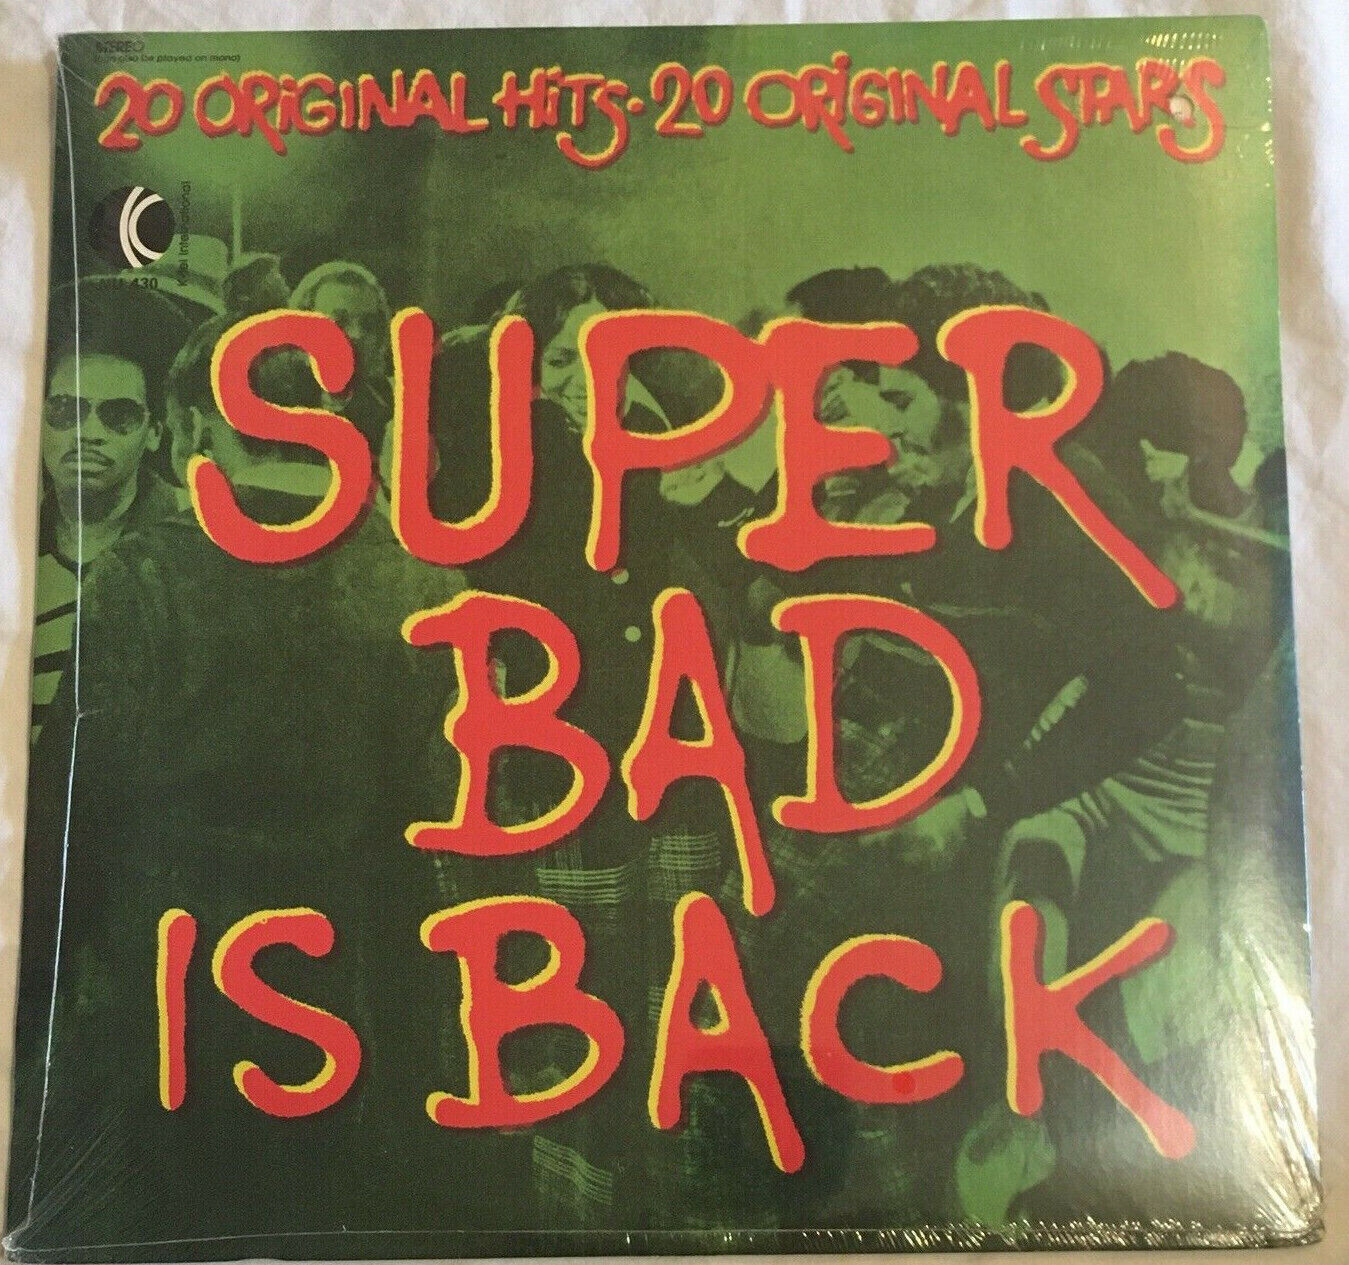 SUPER BAD IS BACK Rare Sealed 70's Funk DISCO James Brown CURTIS MAYFIELD O'Jays